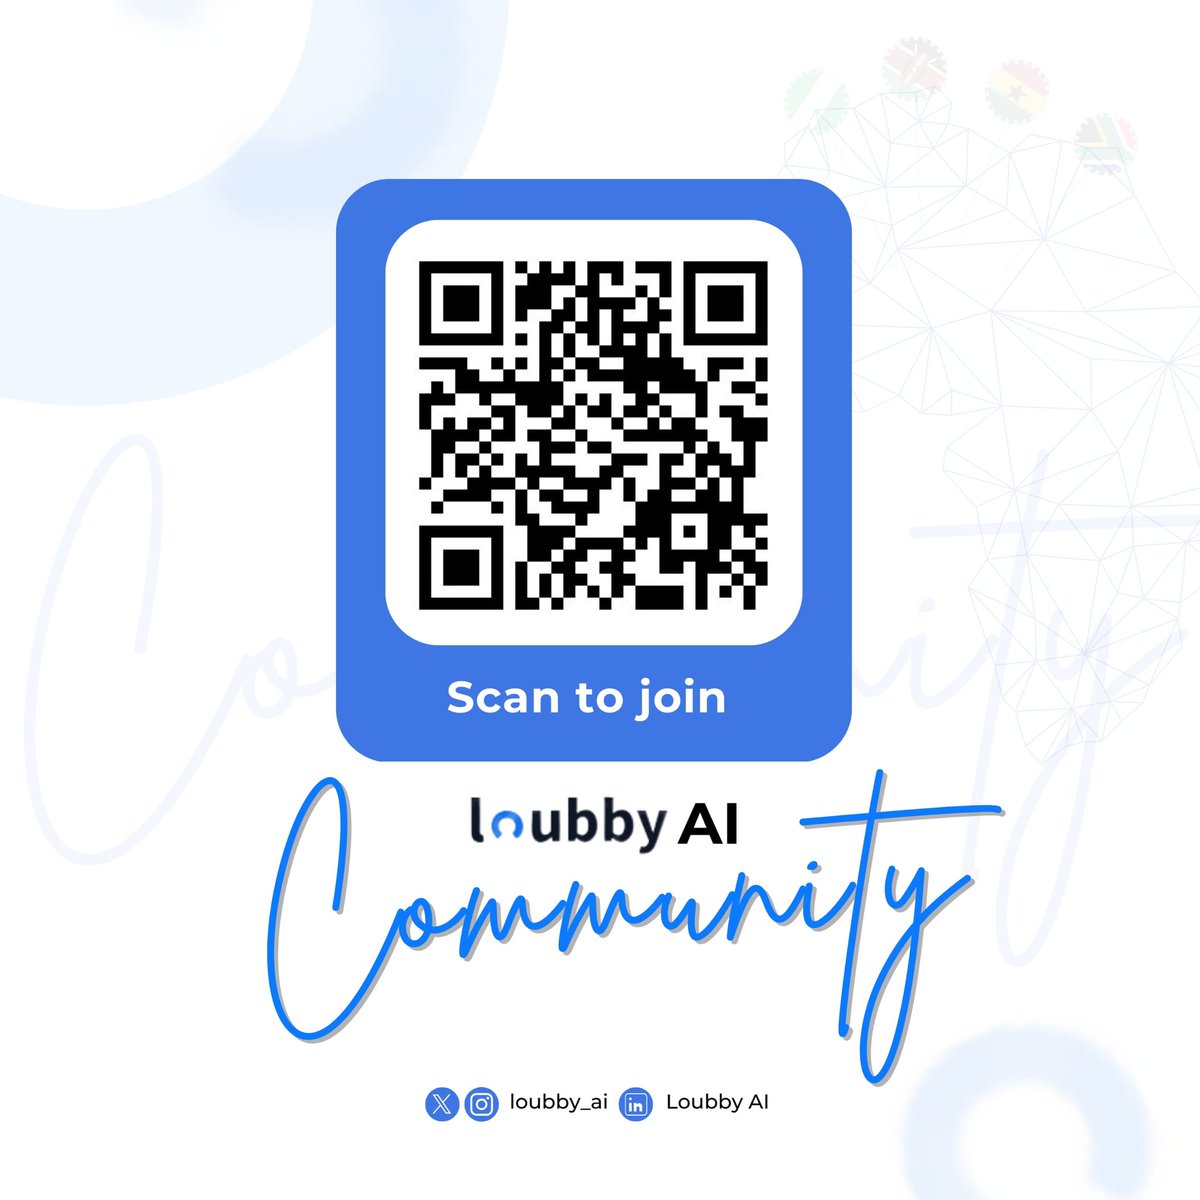 Scan to join our #community

#designers #developers #tech #world #Africa #Kenya #Ghana #SouthAfrica #Rwanda #Nigeria #remote #remotework #resume #Portfolio #productmanagers #DevOps #ai #ml #augmentedreality #VirtualReality #gaming #TwitterSpace #success